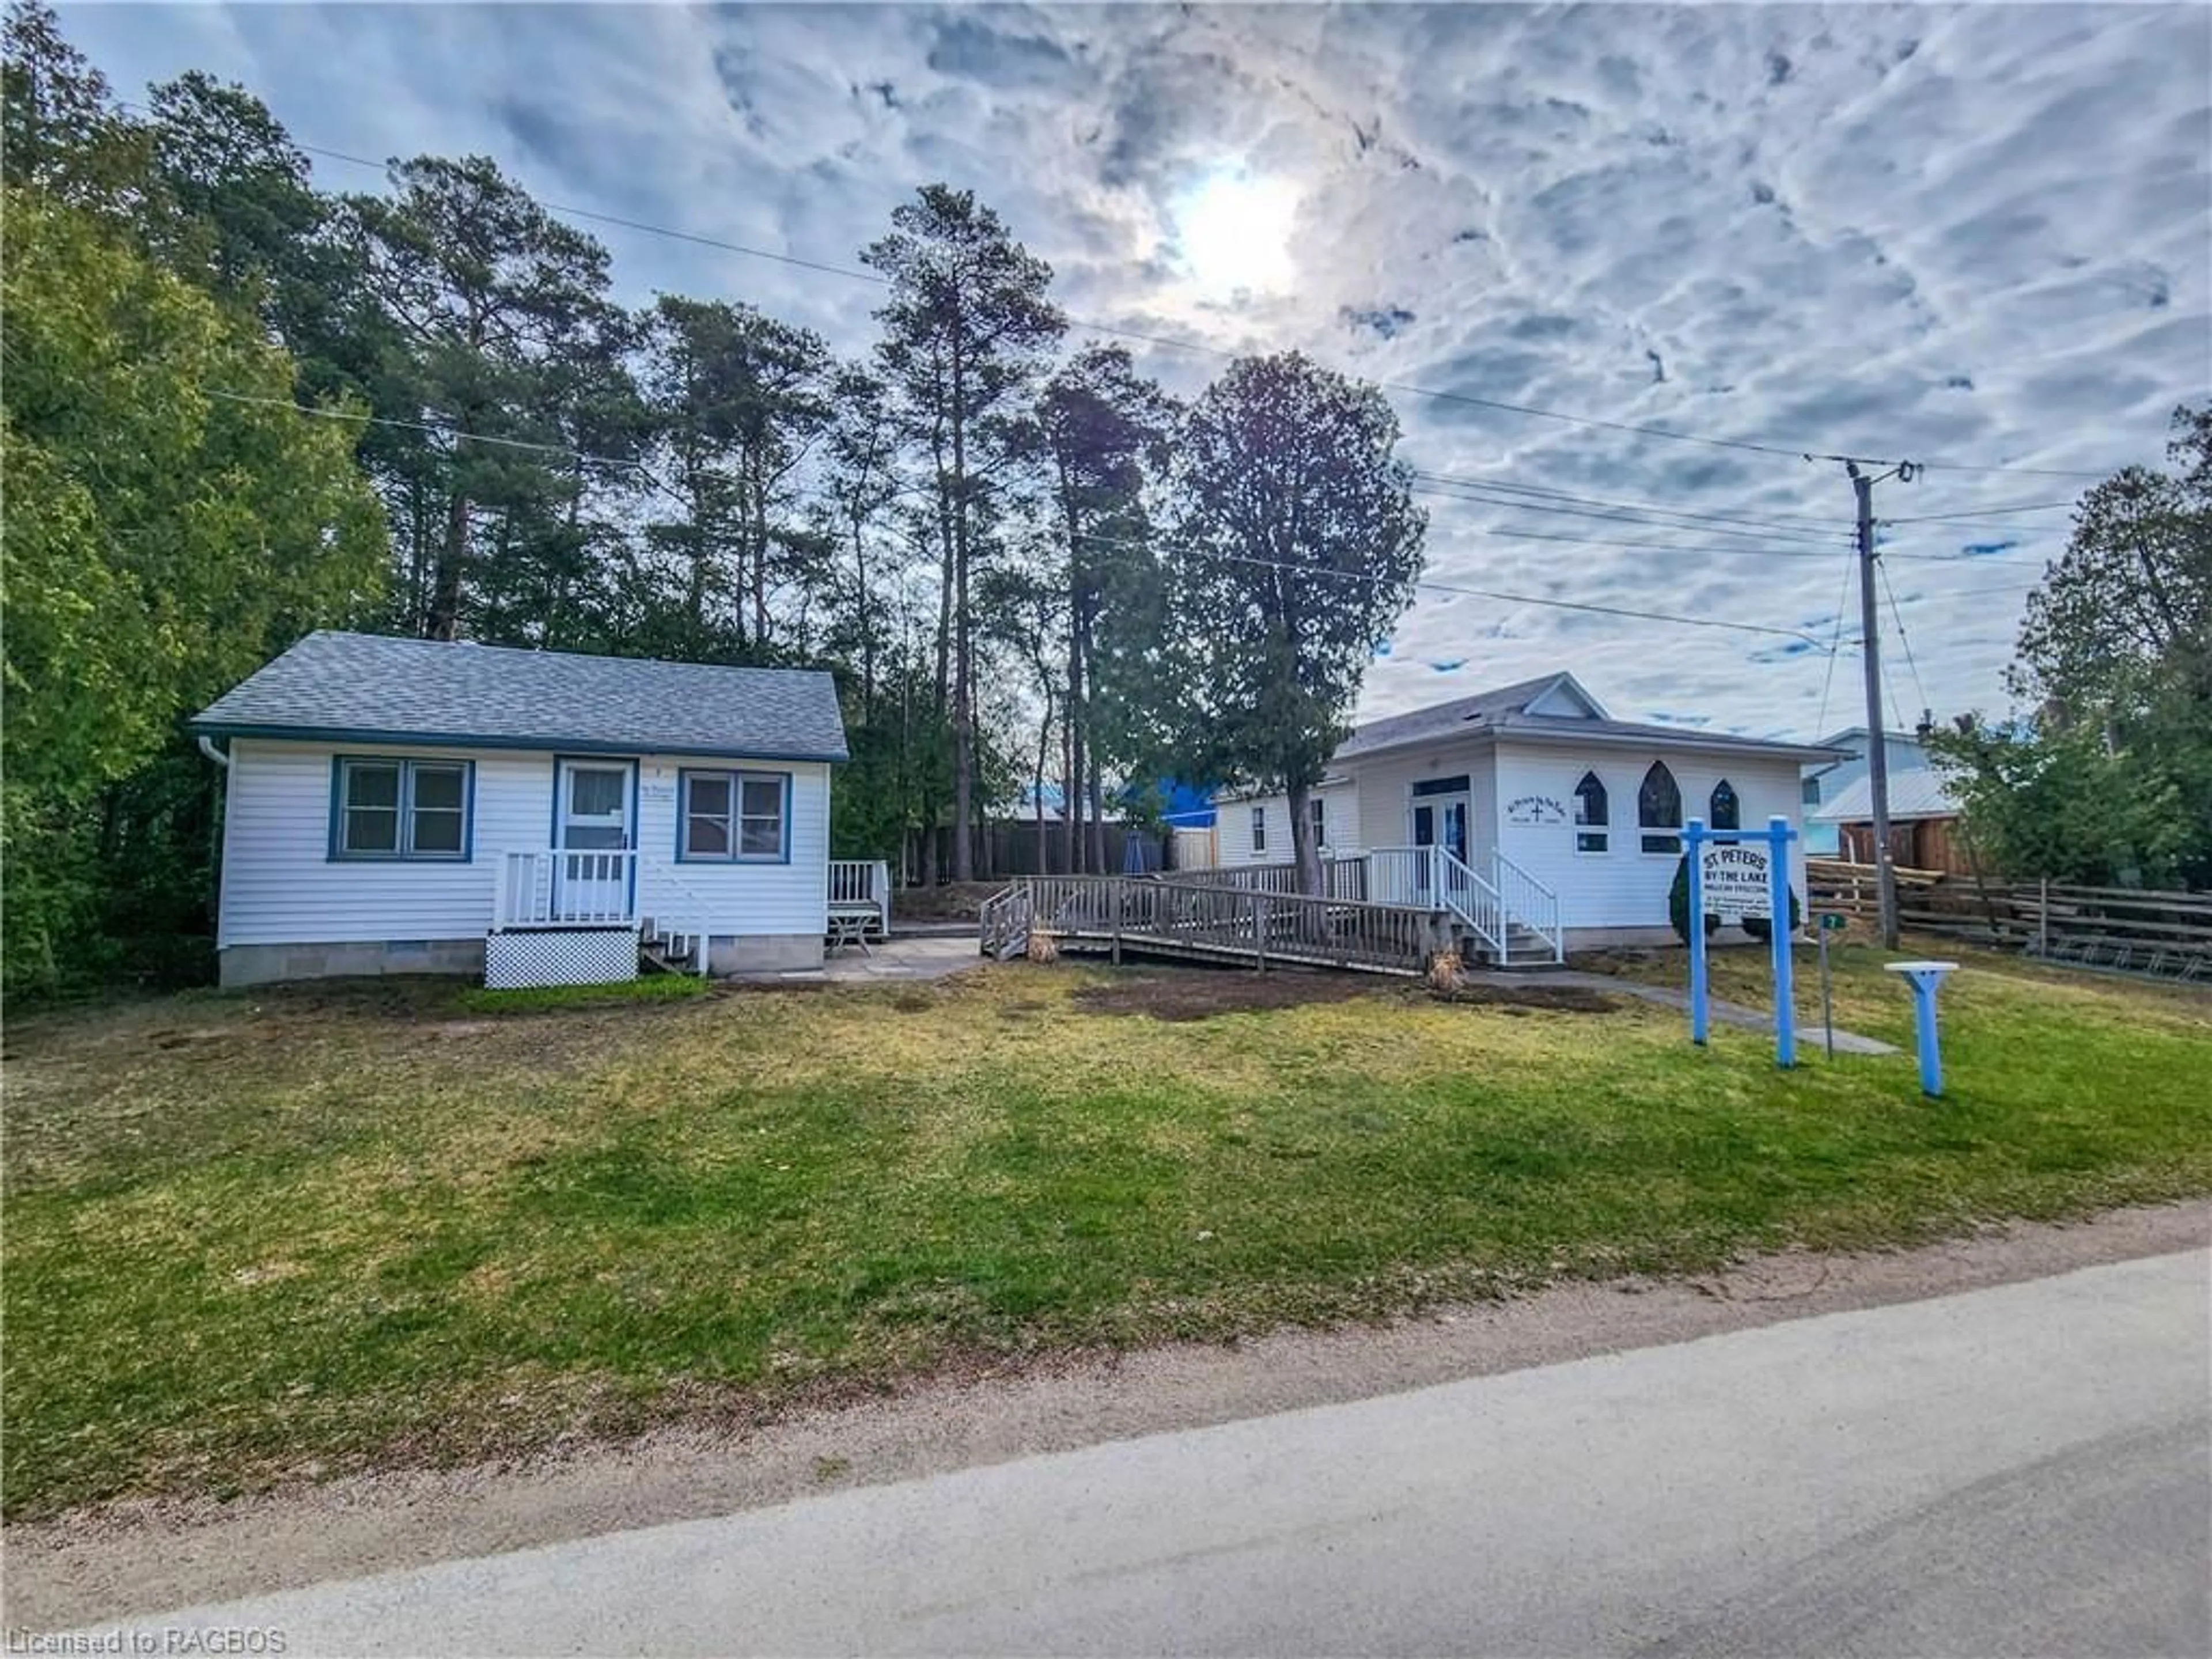 Cottage for 7 Third Ave N Ave, Sauble Beach Ontario N0H 2T0